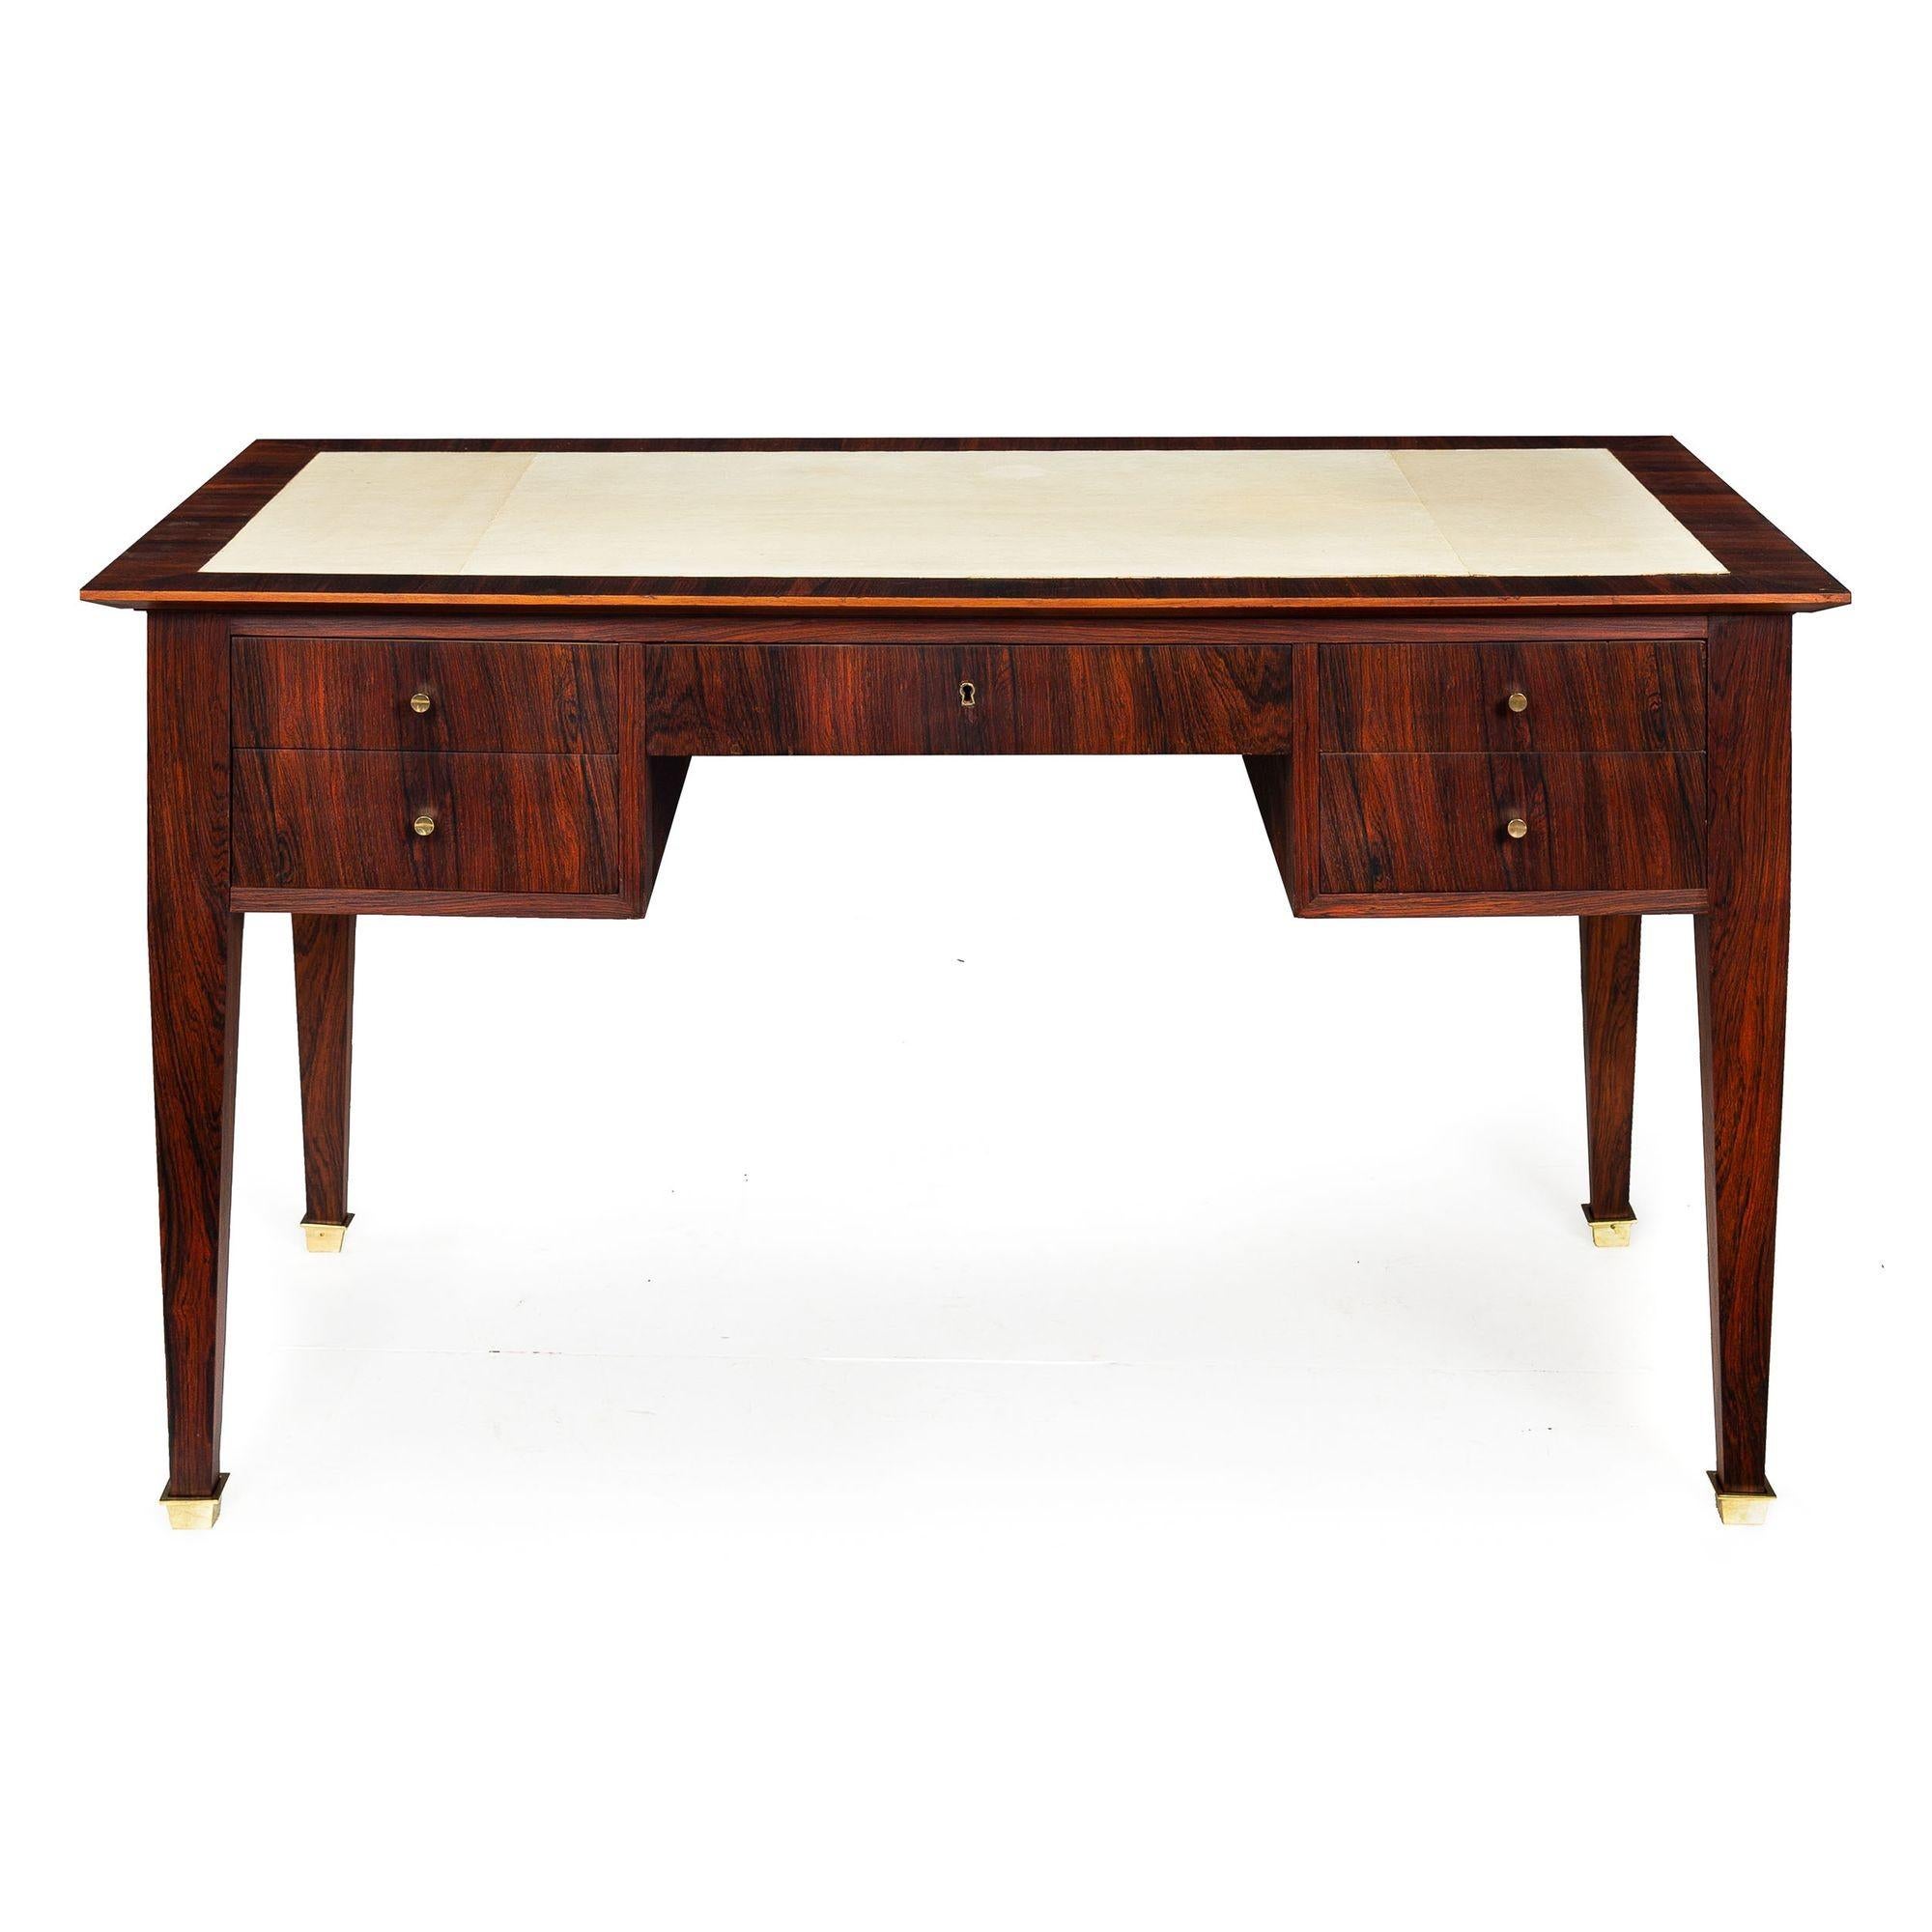 ART DECO MACASSAR EBONY, PARCHMENT AND BRASS BUREAU PLAT
Likely French, circa 1930
Item # 111PZN03Z 

A very fine Art Deco period bureau plat, it features chaotically grained Macassar ebony veneers throughout and retains the original lacquered